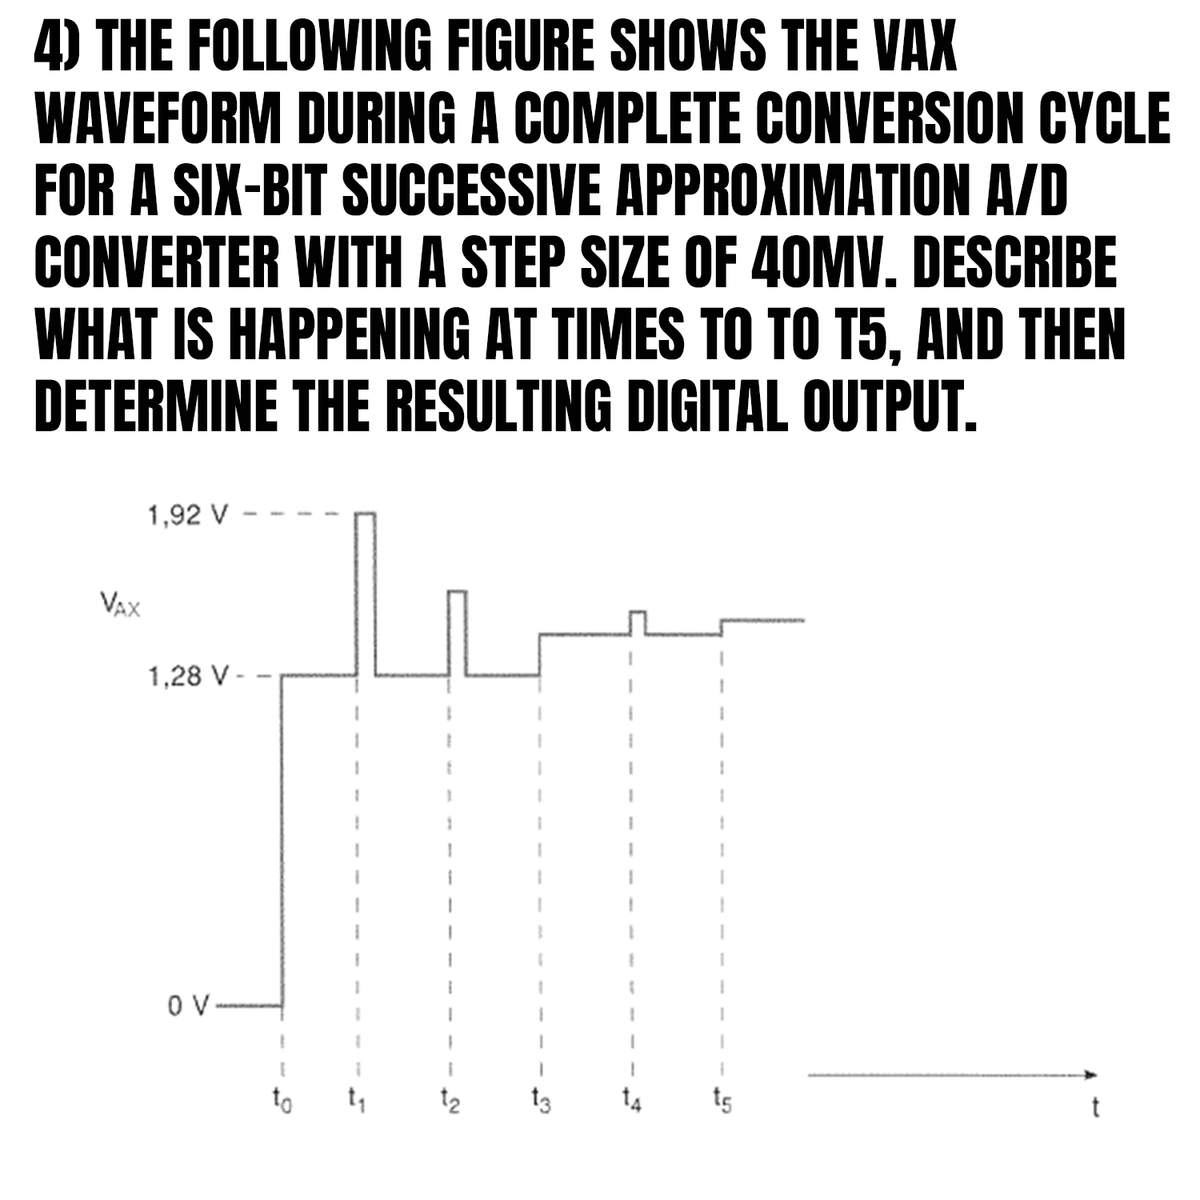 4) THE FOLLOWING FIGURE SHOWS THE VAX
WAVEFORM DURING A COMPLETE CONVERSION CYCLE
FOR A SIX-BIT SUCCESSIVE APPROXIMATION A/D
CONVERTER WITH A STEP SIZE OF 40MV. DESCRIBE
WHAT IS HAPPENING AT TIMES TO TO T5, AND THEN
DETERMINE THE RESULTING DIGITAL OUTPUT.
VAX
1,92 V
1,28 V-
OV.
1
1₁
1
t₂
13
1
1
1
t